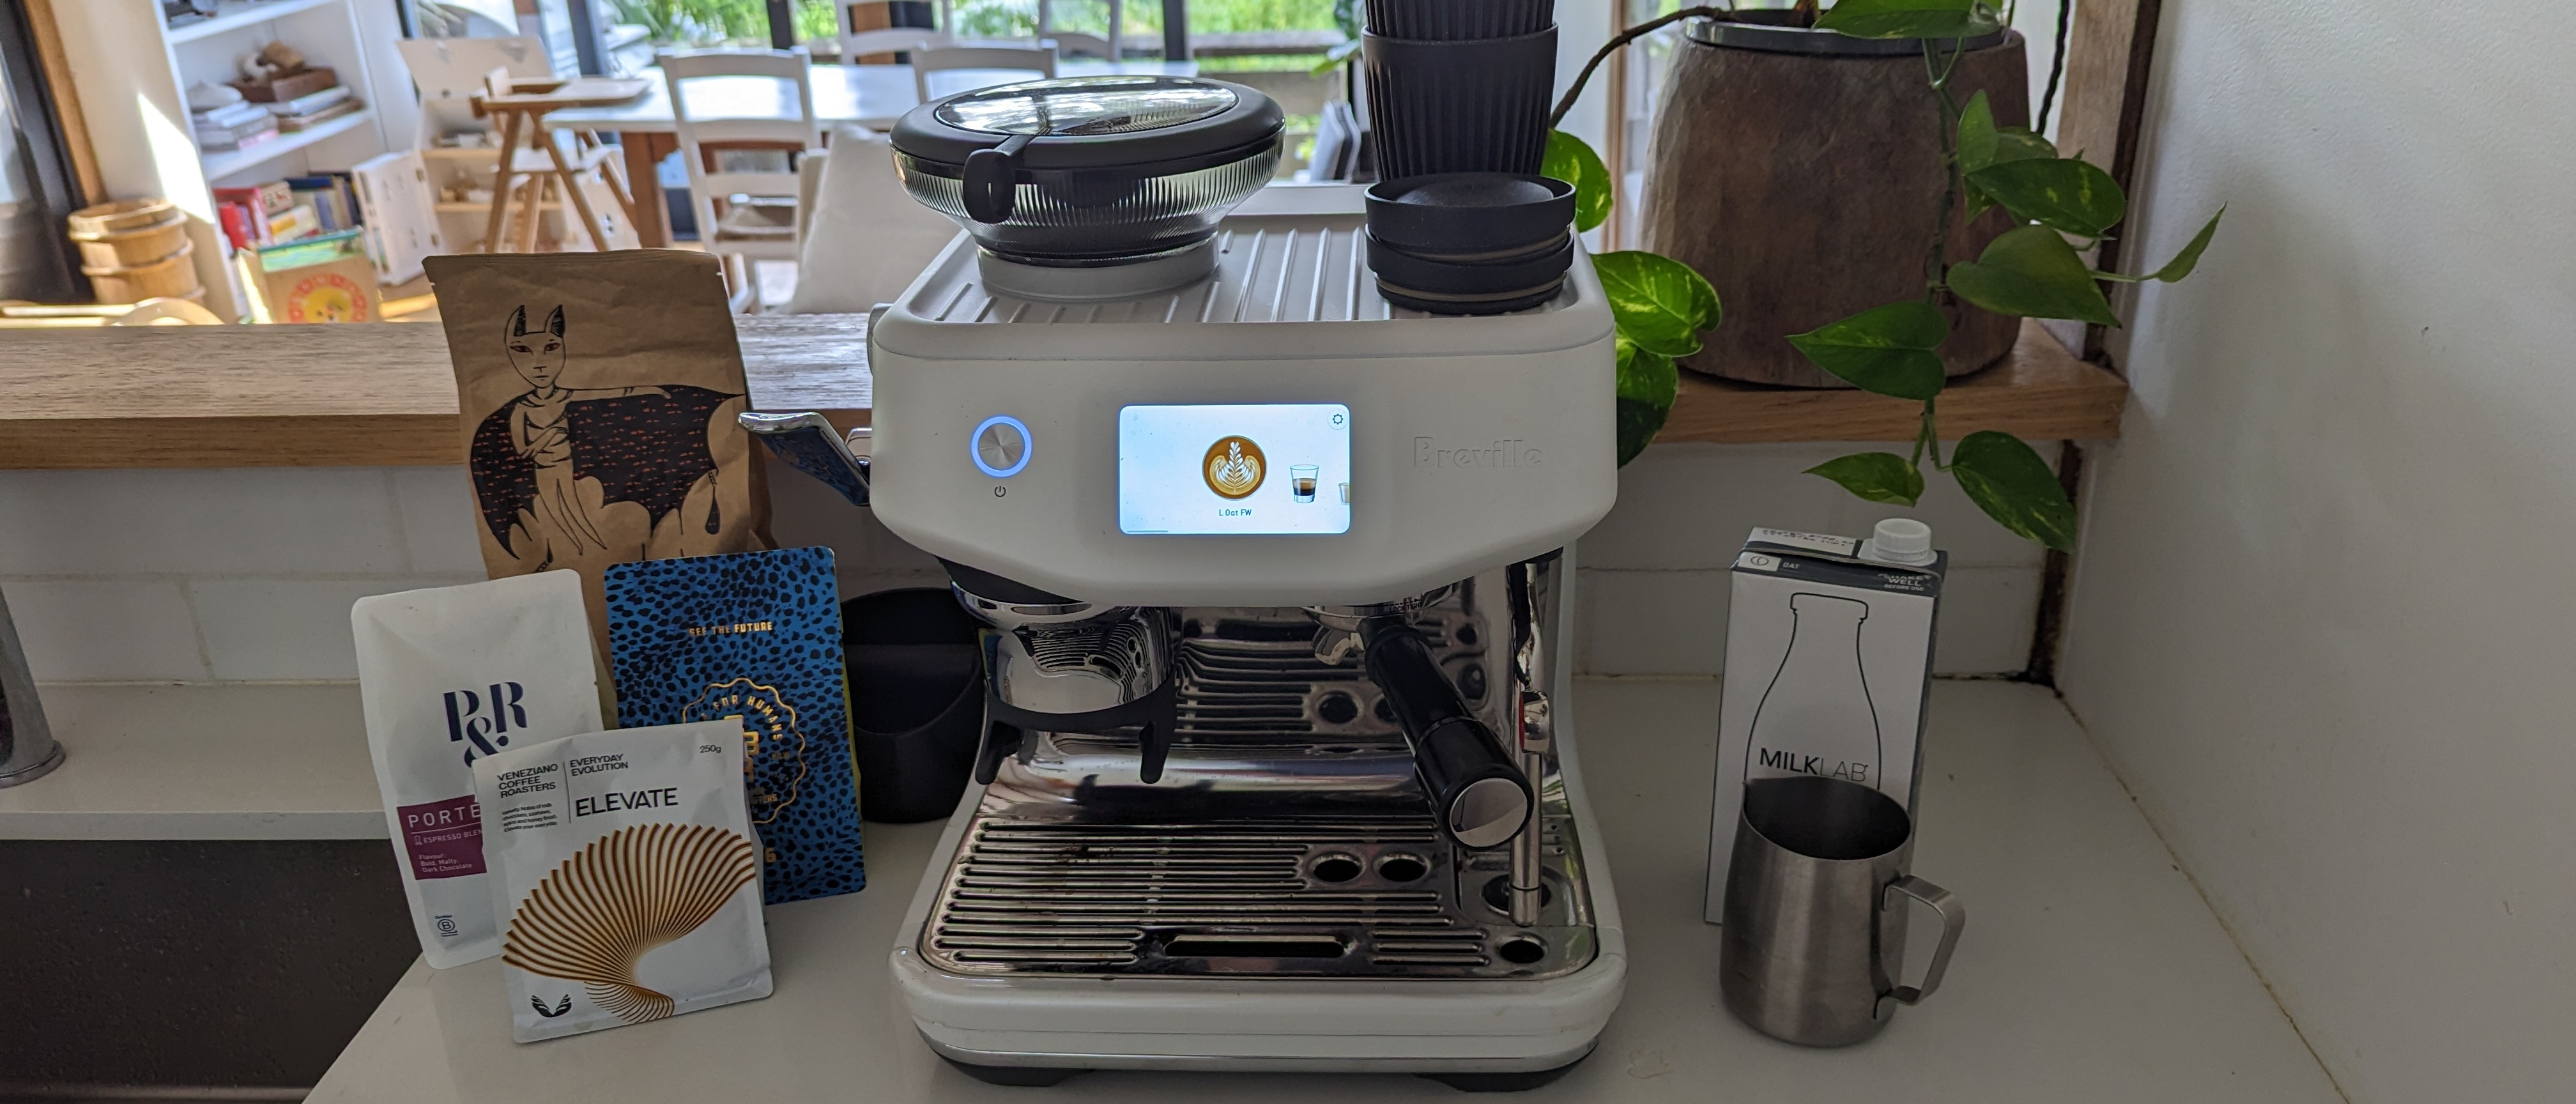 The Best Breville Products We've Tested